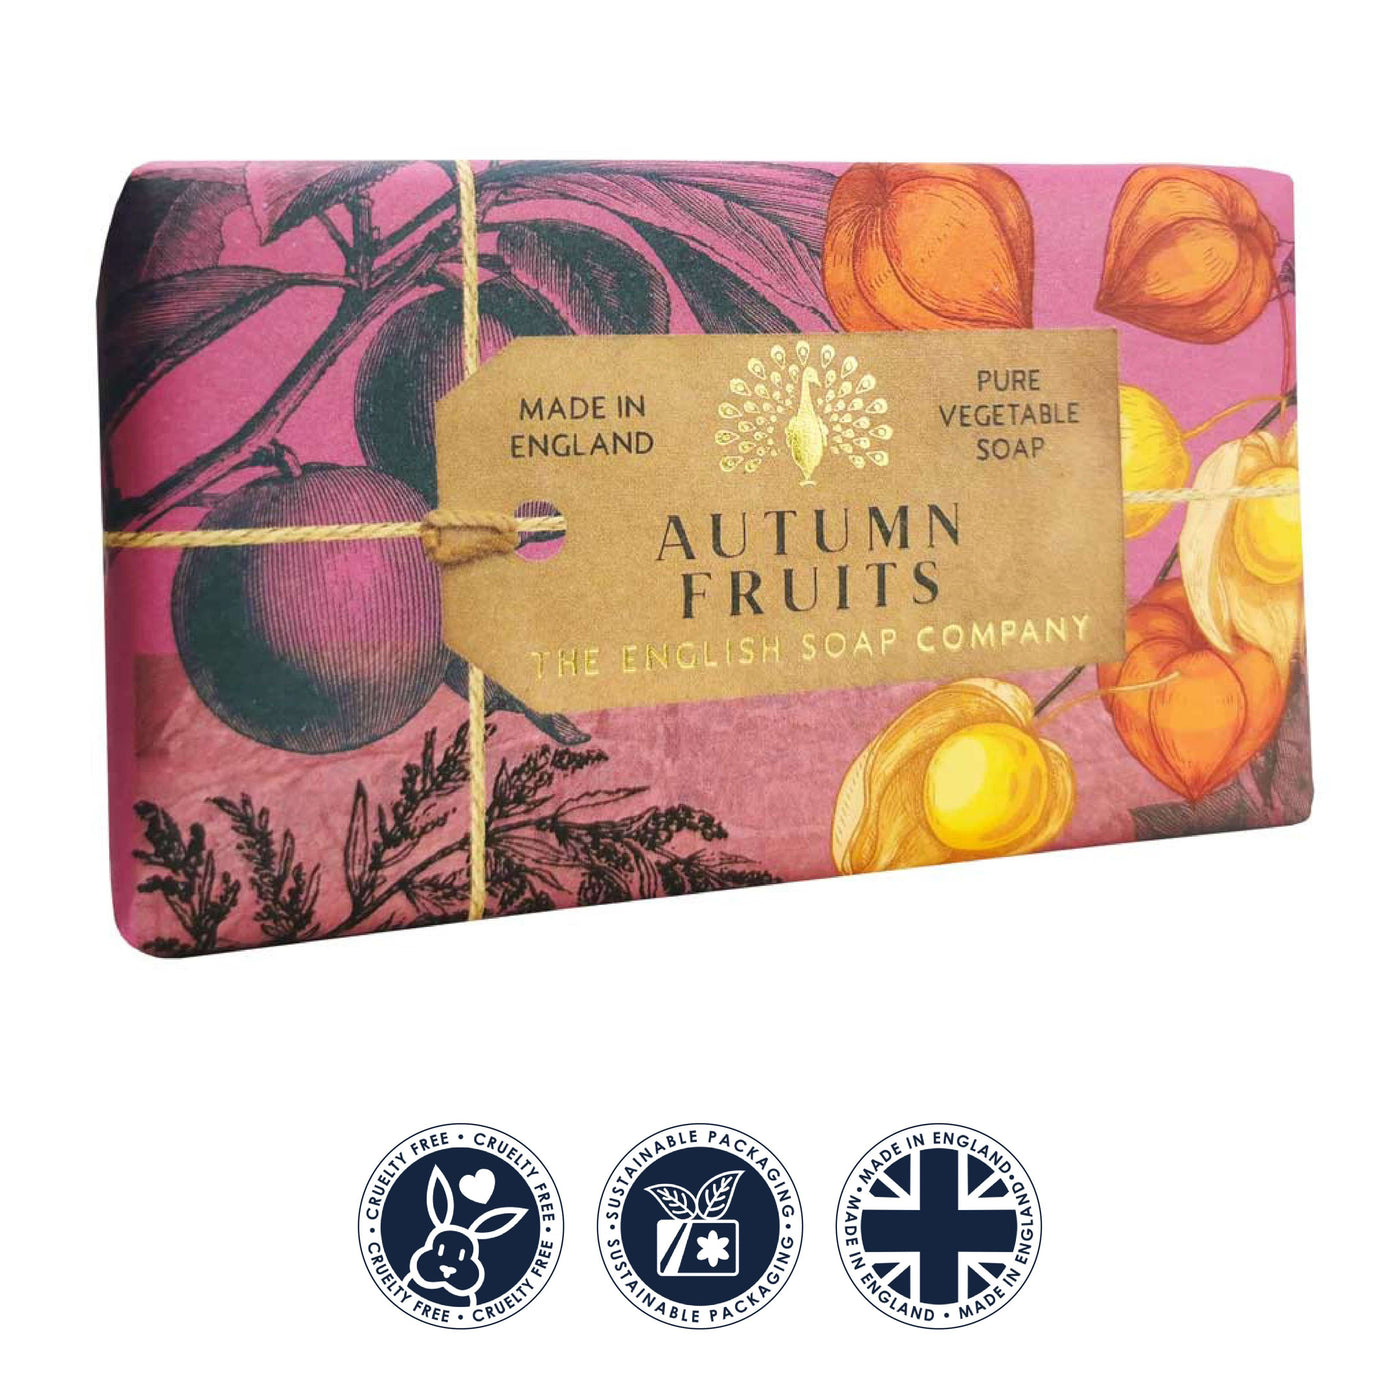 Anniversary Autumn Fruits Soap Bar from our Luxury Bar Soap collection by The English Soap Company